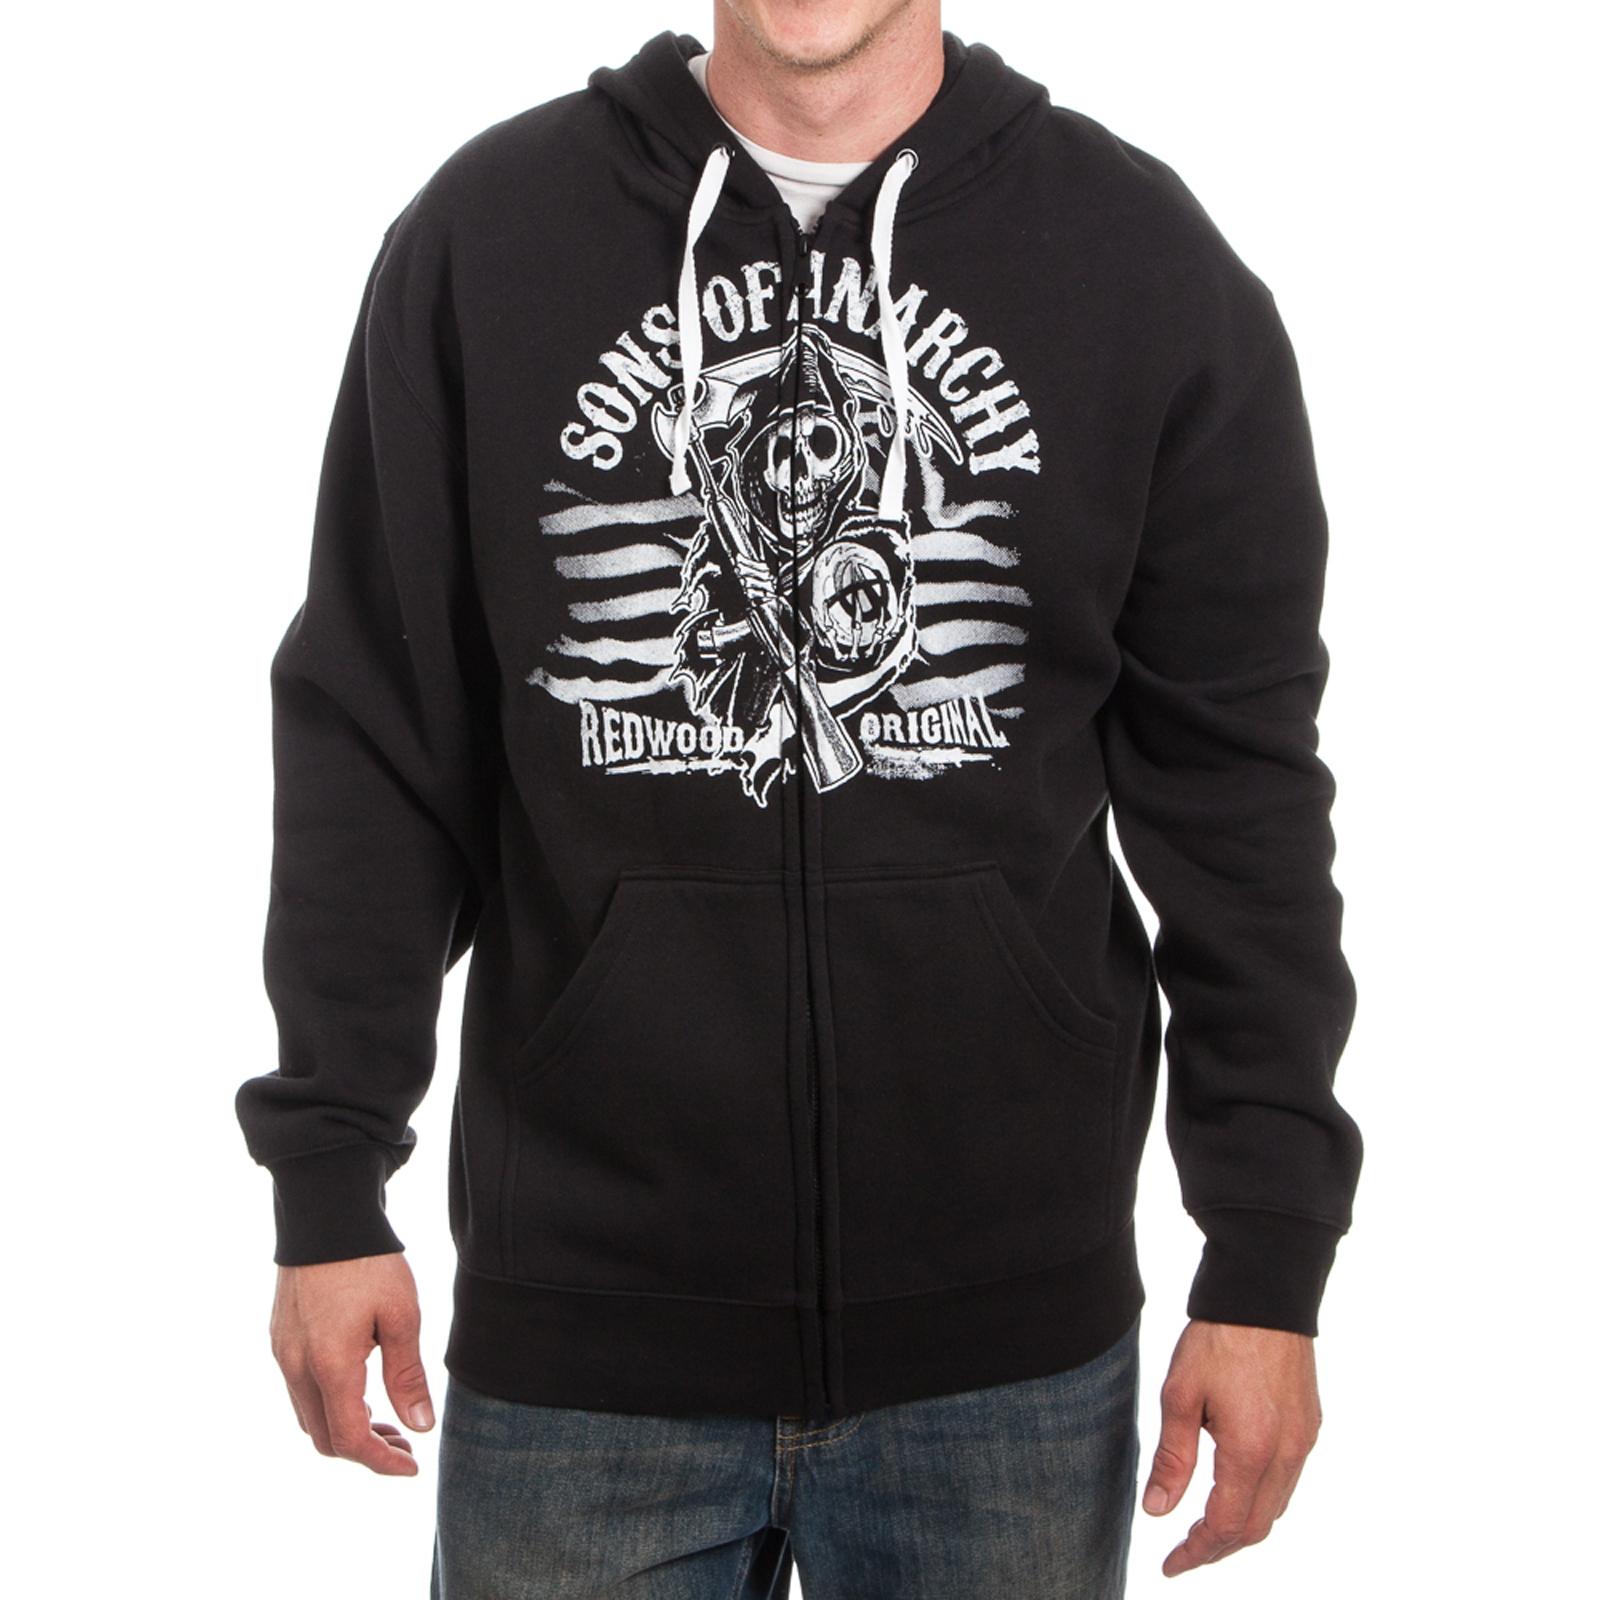 20th Century Fox Sons of Anarchy Men's Hoodie Jacket